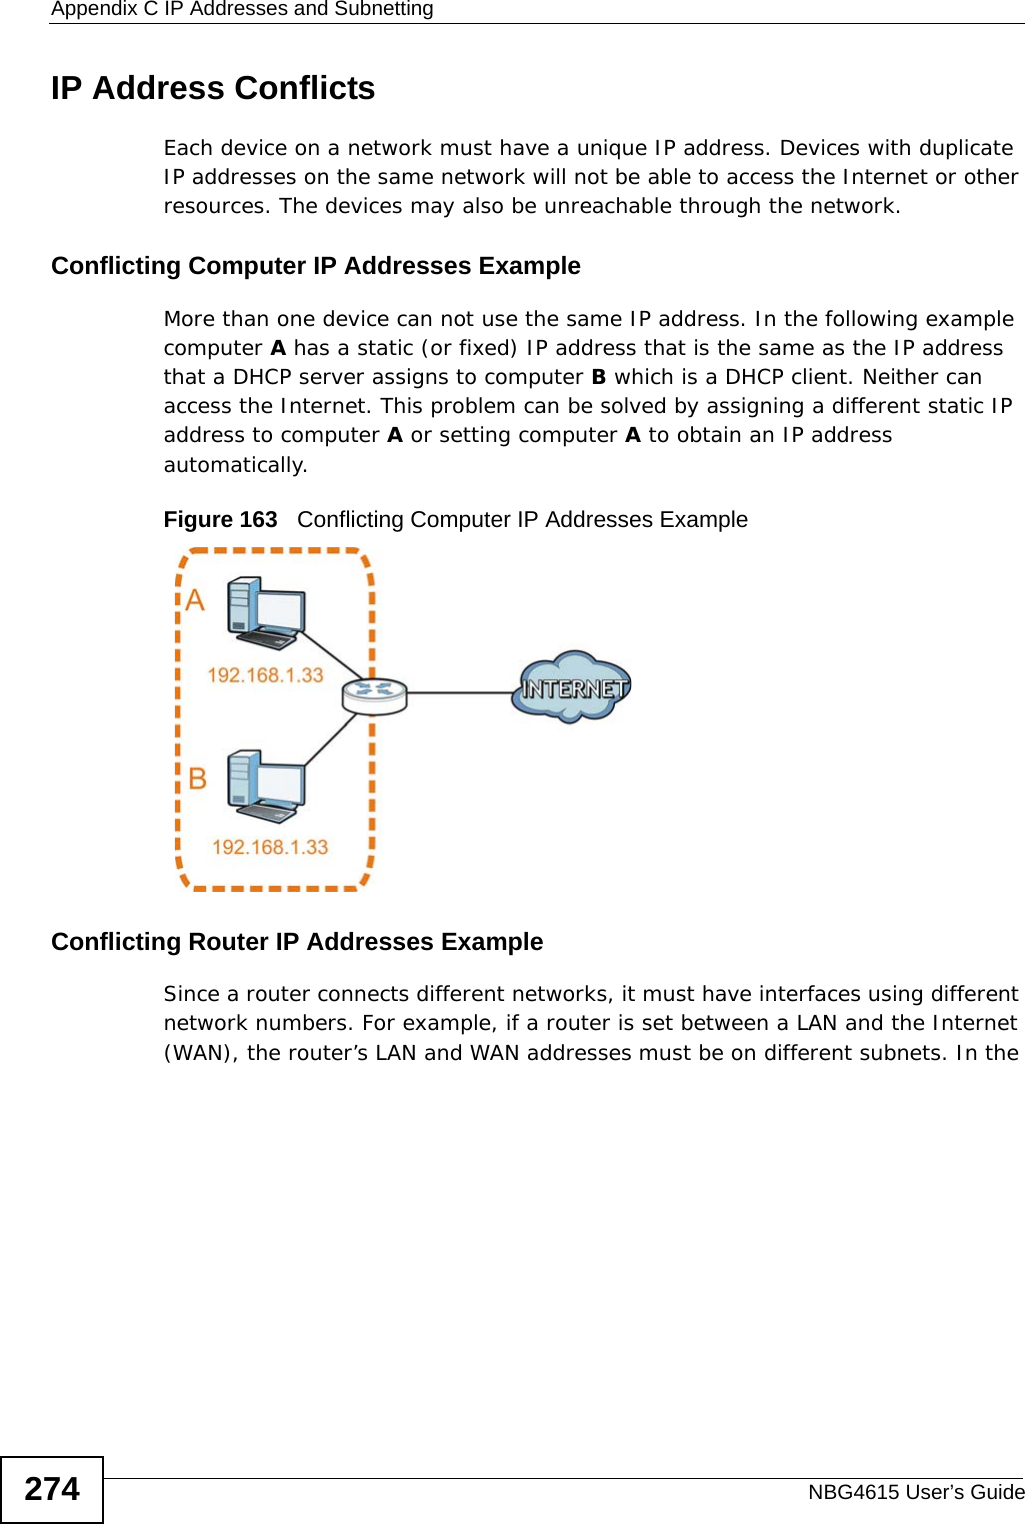 Appendix C IP Addresses and SubnettingNBG4615 User’s Guide274IP Address ConflictsEach device on a network must have a unique IP address. Devices with duplicate IP addresses on the same network will not be able to access the Internet or other resources. The devices may also be unreachable through the network. Conflicting Computer IP Addresses ExampleMore than one device can not use the same IP address. In the following example computer A has a static (or fixed) IP address that is the same as the IP address that a DHCP server assigns to computer B which is a DHCP client. Neither can access the Internet. This problem can be solved by assigning a different static IP address to computer A or setting computer A to obtain an IP address automatically.  Figure 163   Conflicting Computer IP Addresses ExampleConflicting Router IP Addresses ExampleSince a router connects different networks, it must have interfaces using different network numbers. For example, if a router is set between a LAN and the Internet (WAN), the router’s LAN and WAN addresses must be on different subnets. In the 